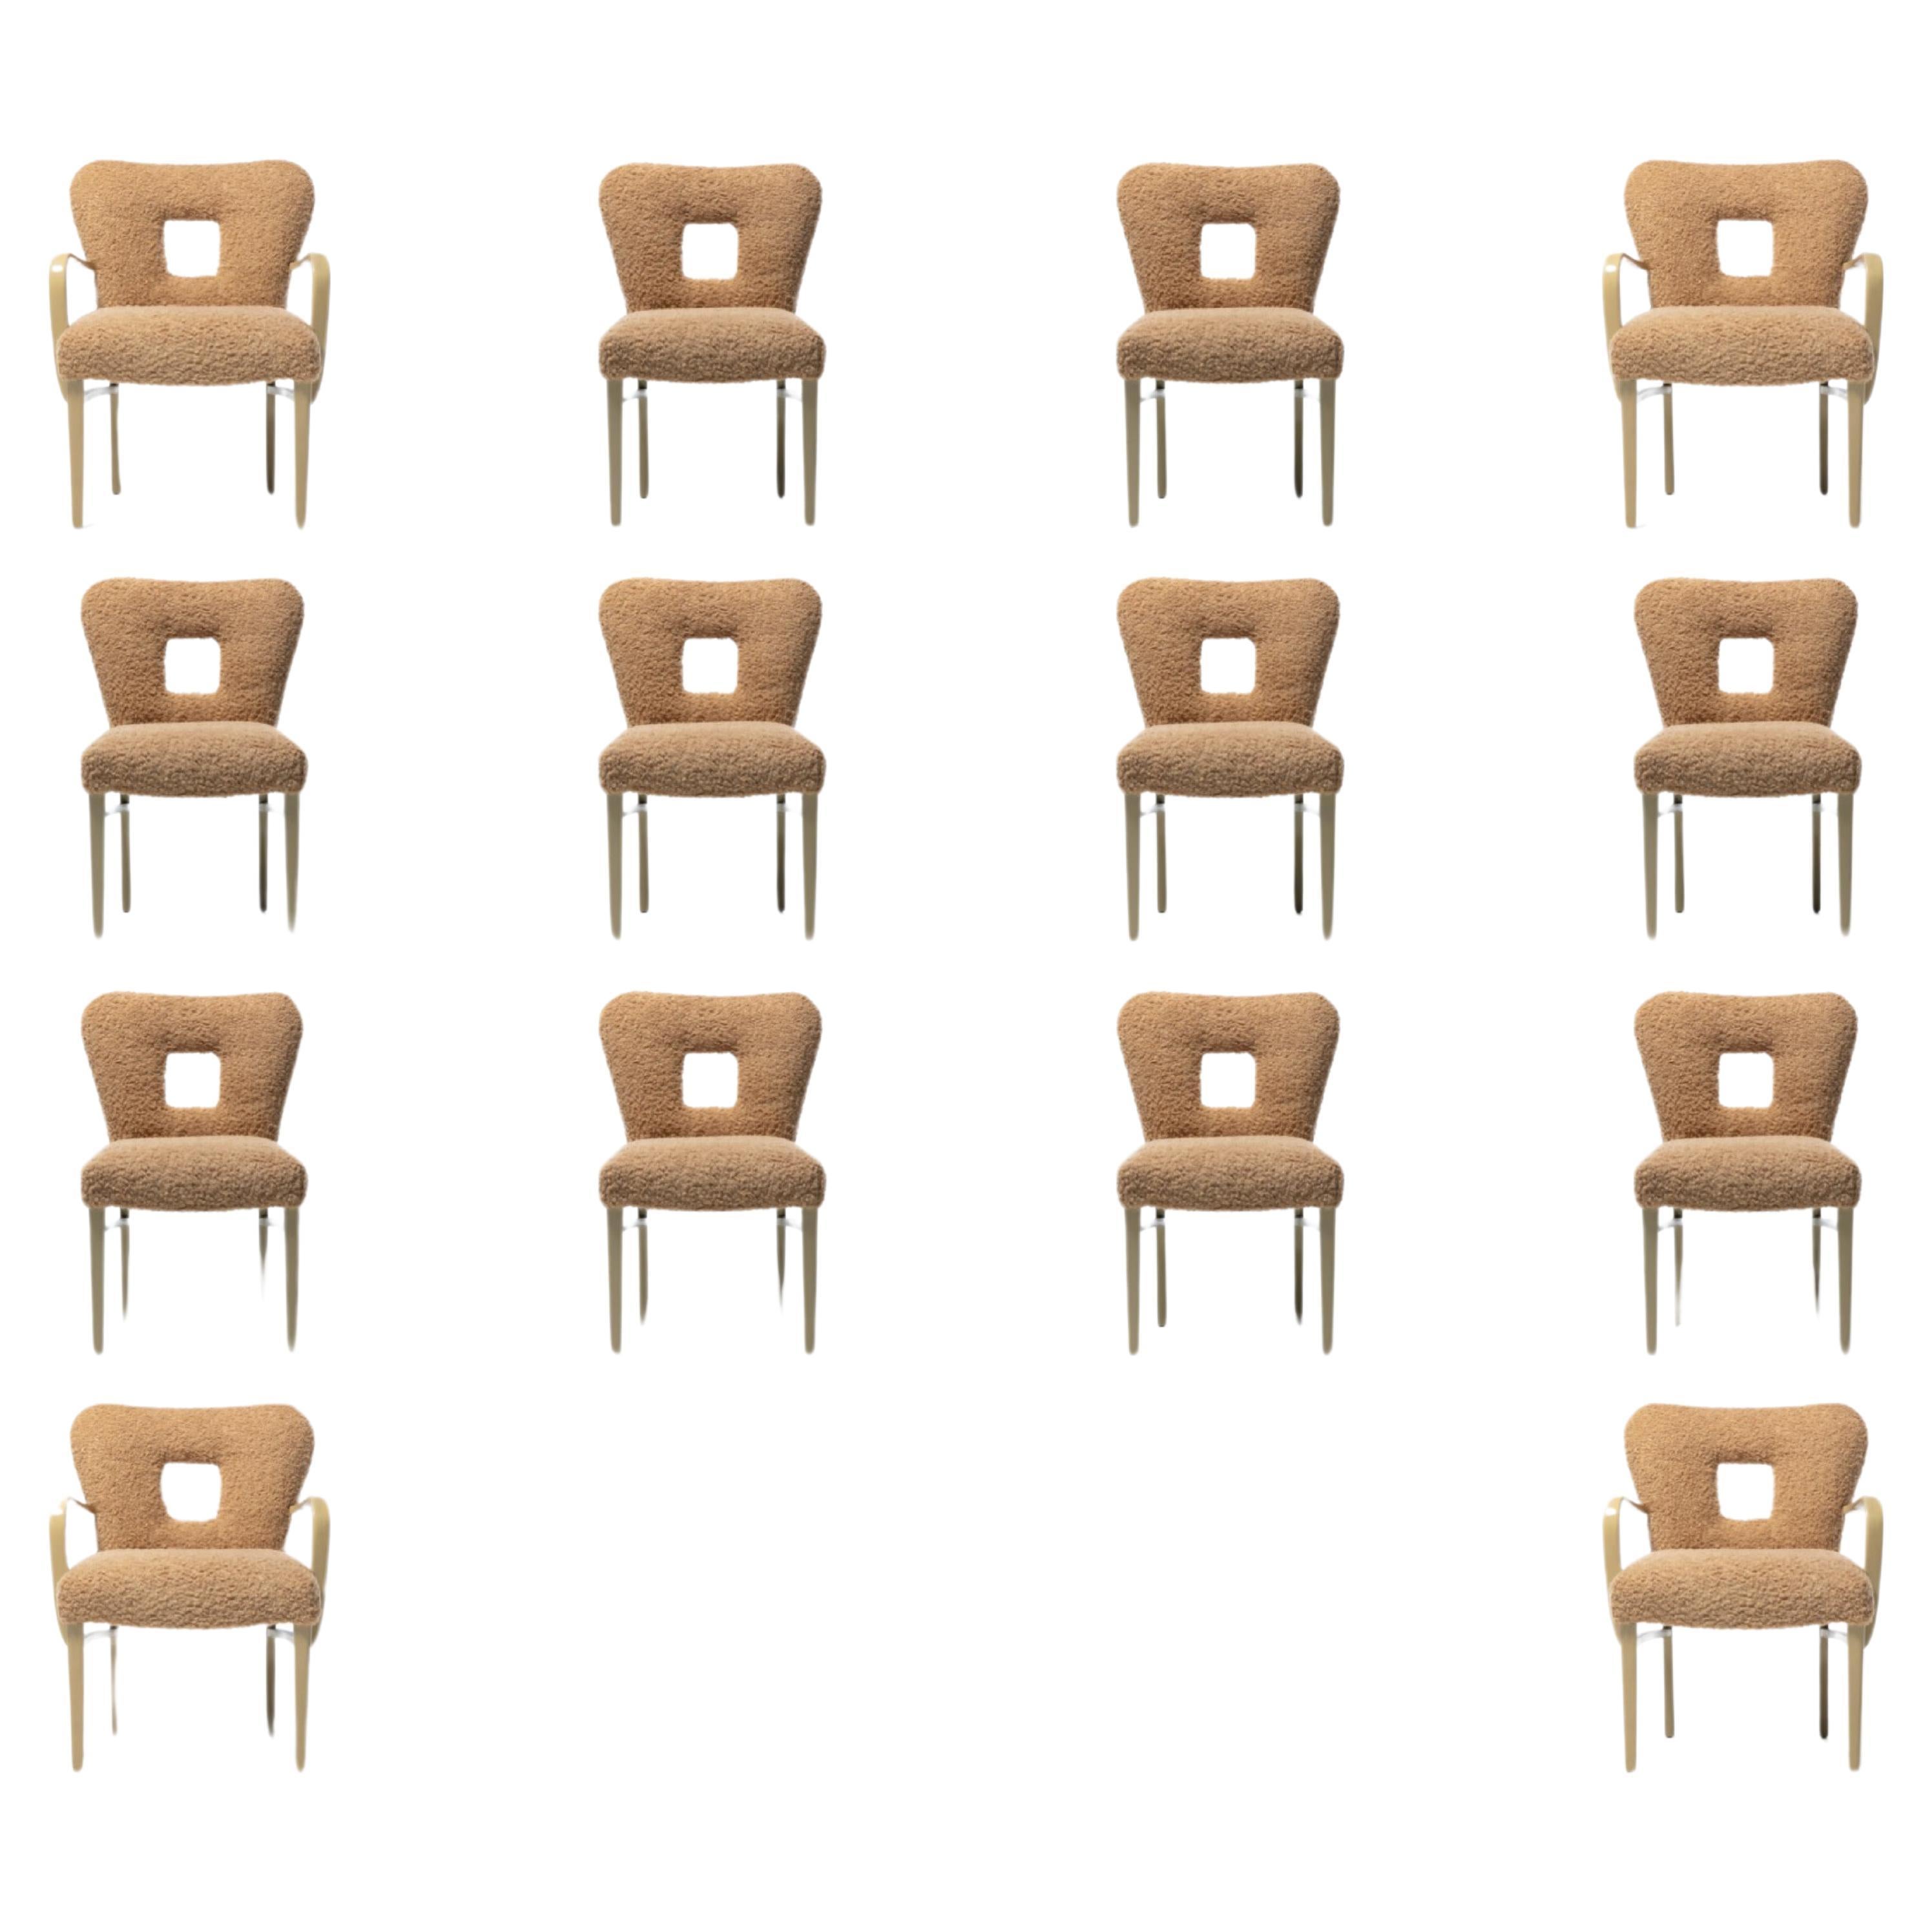 Paul Frankl Set of 14 Dining Chairs in Bleached Mahogany & Latte Bouclé c. 1950 For Sale